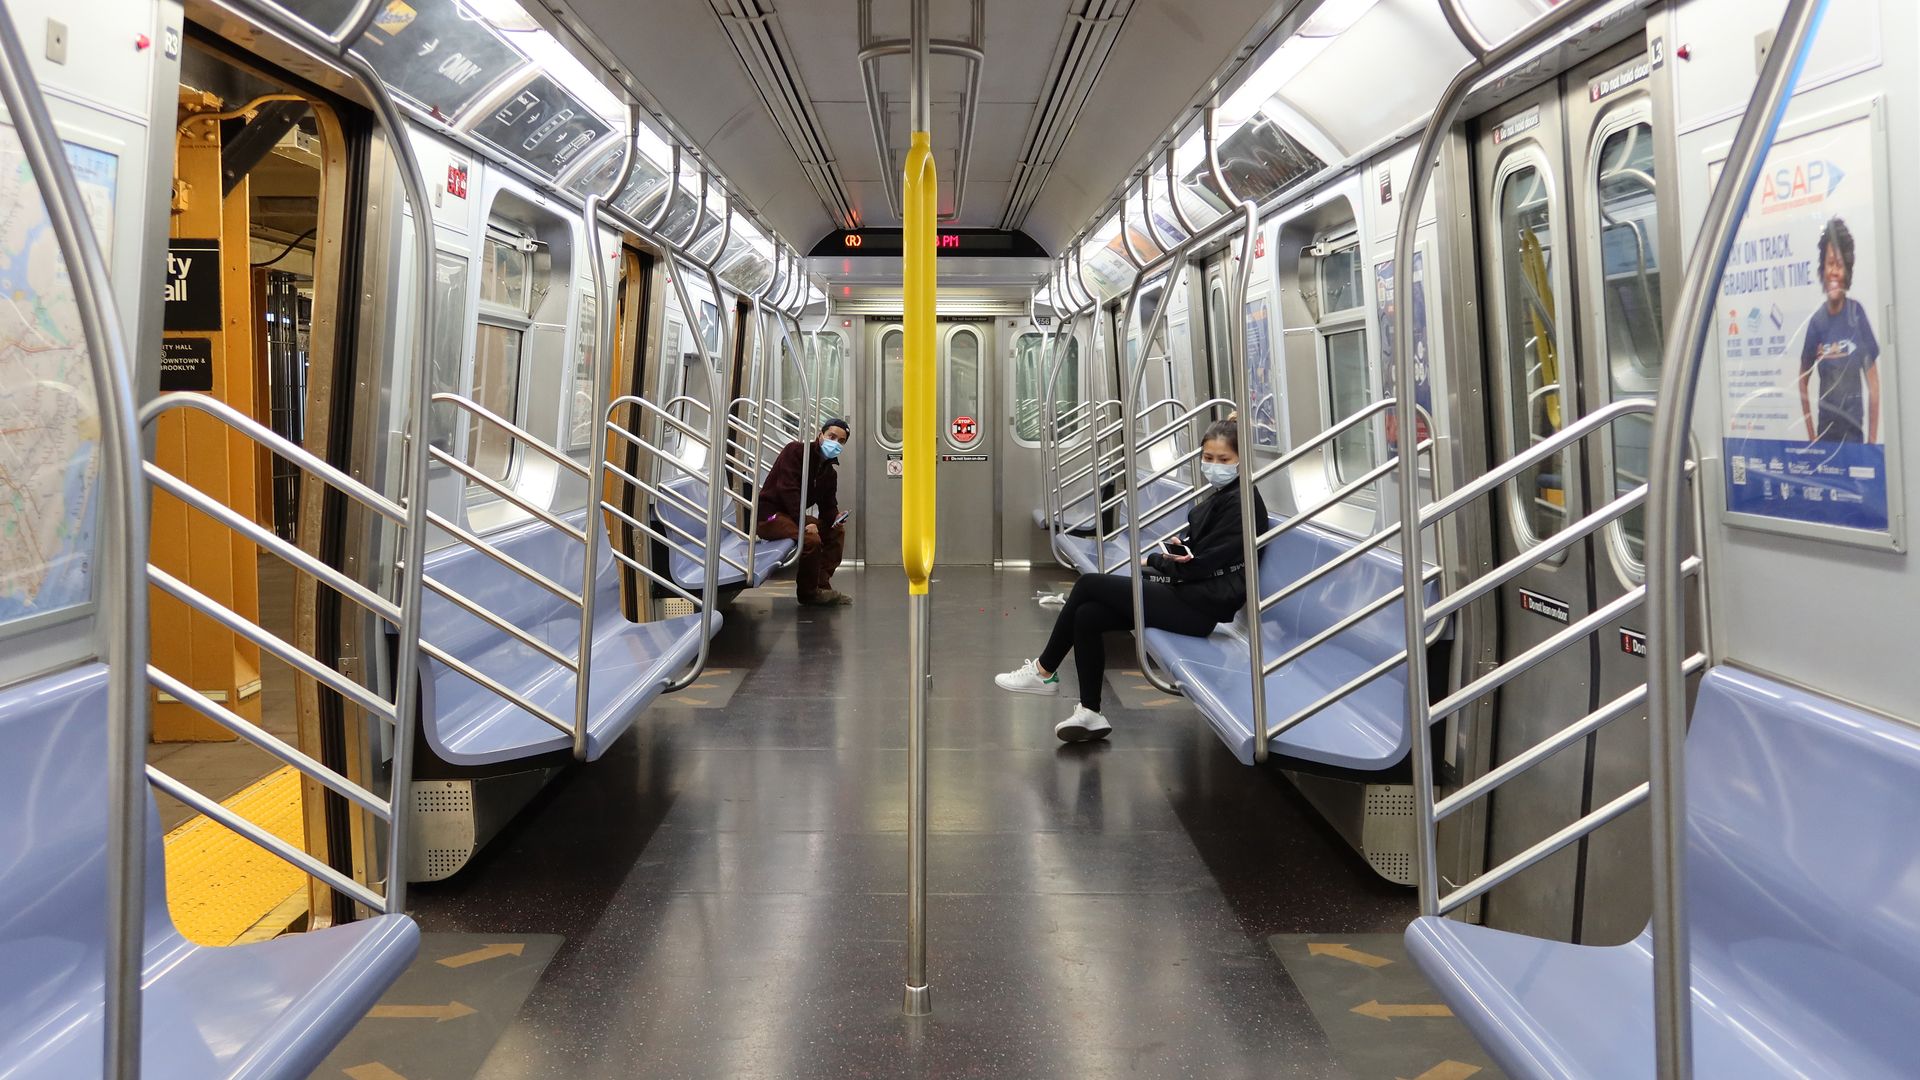 Image of a nearly empty subway car in New York